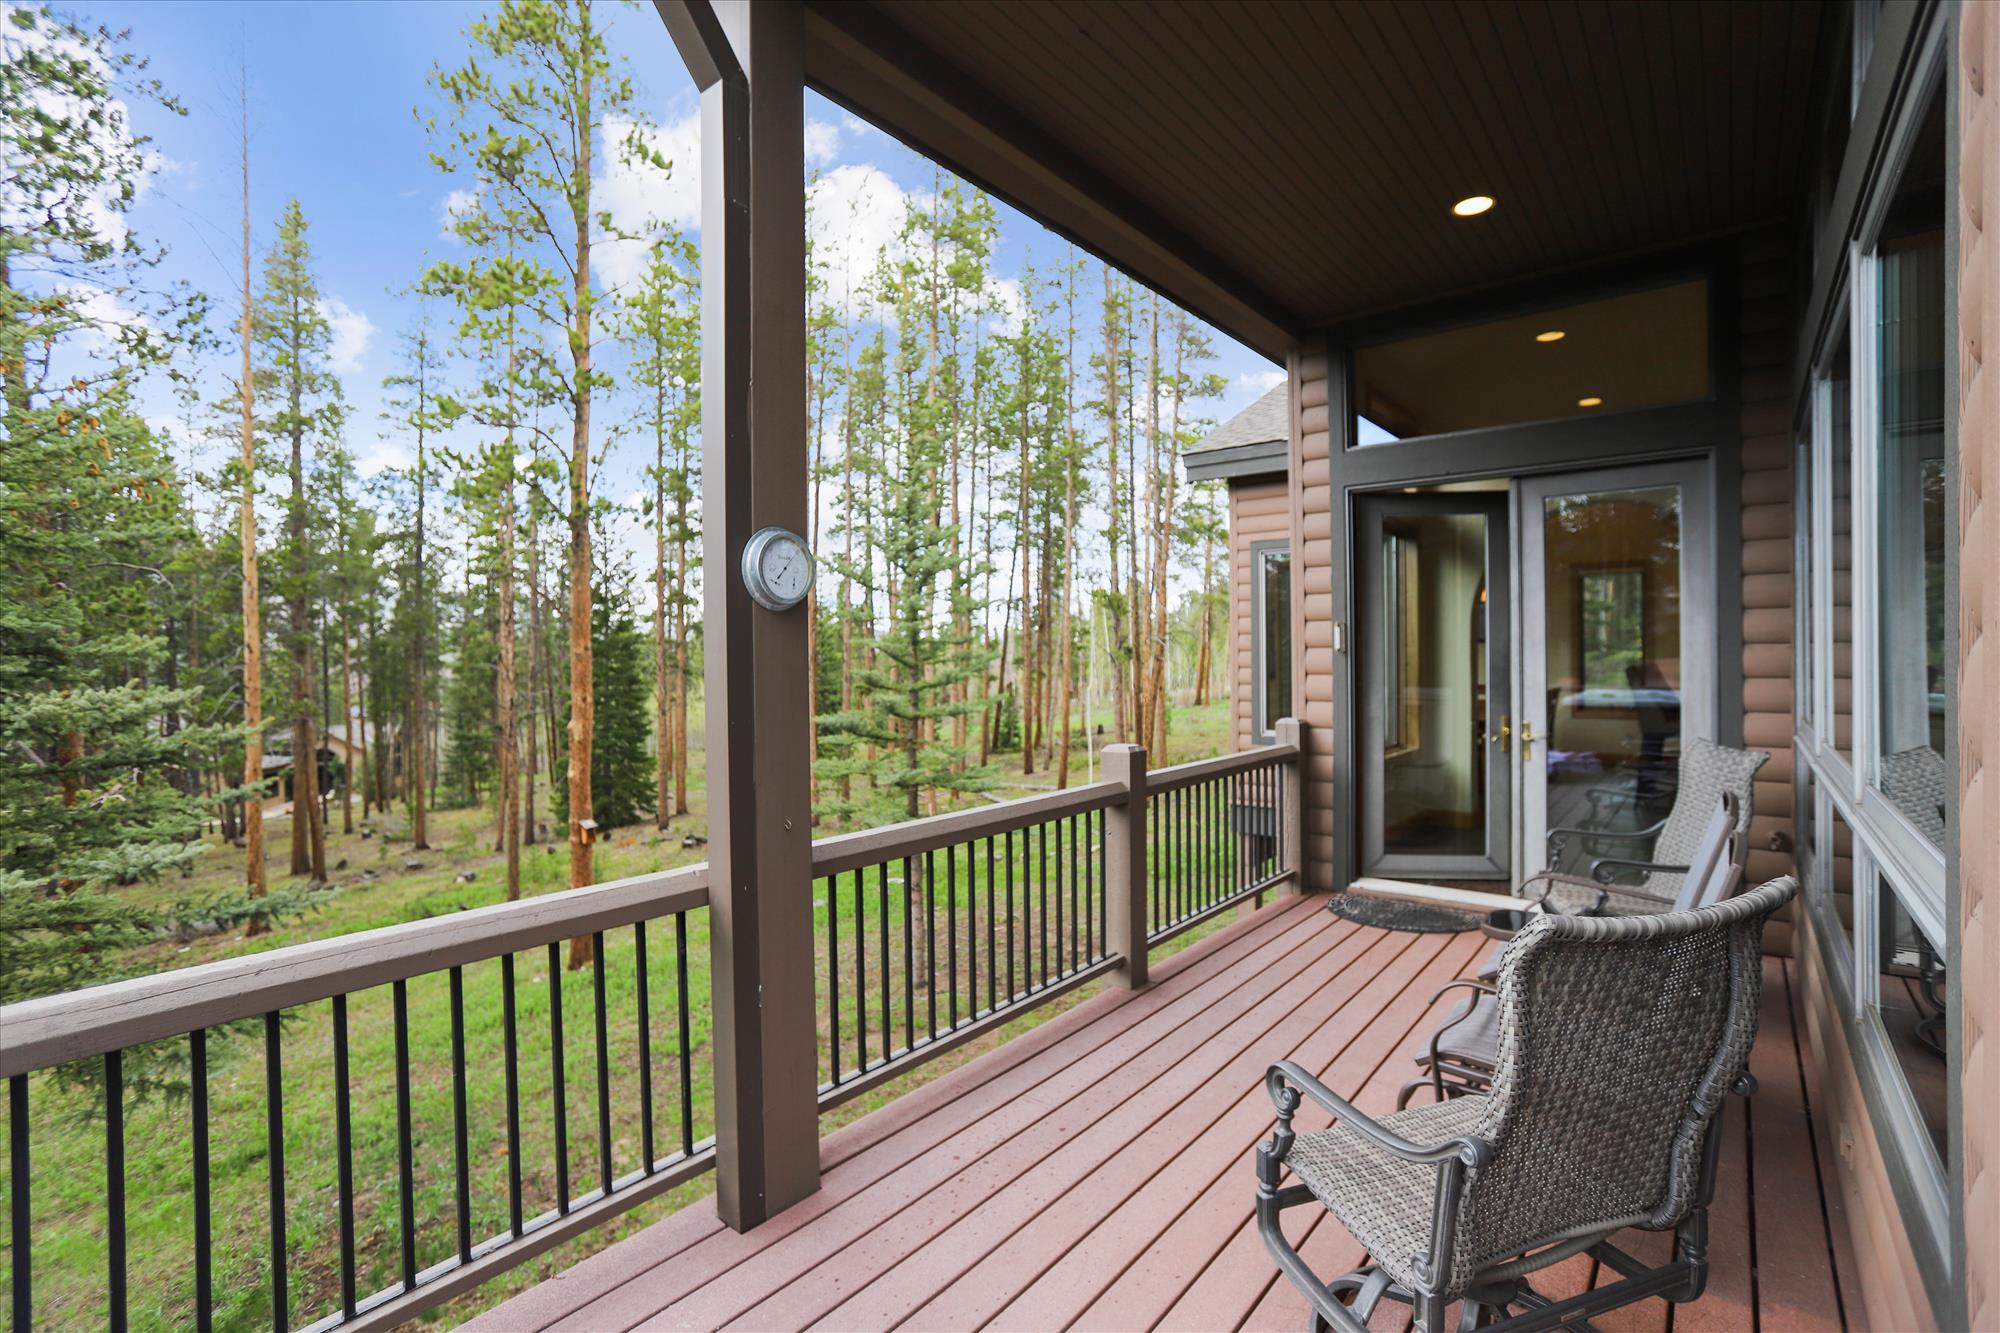 Sit in the warm sun on a summer day and enjoy the views from this large patio - Evergreen Lodge Breckenridge Vacation Rental